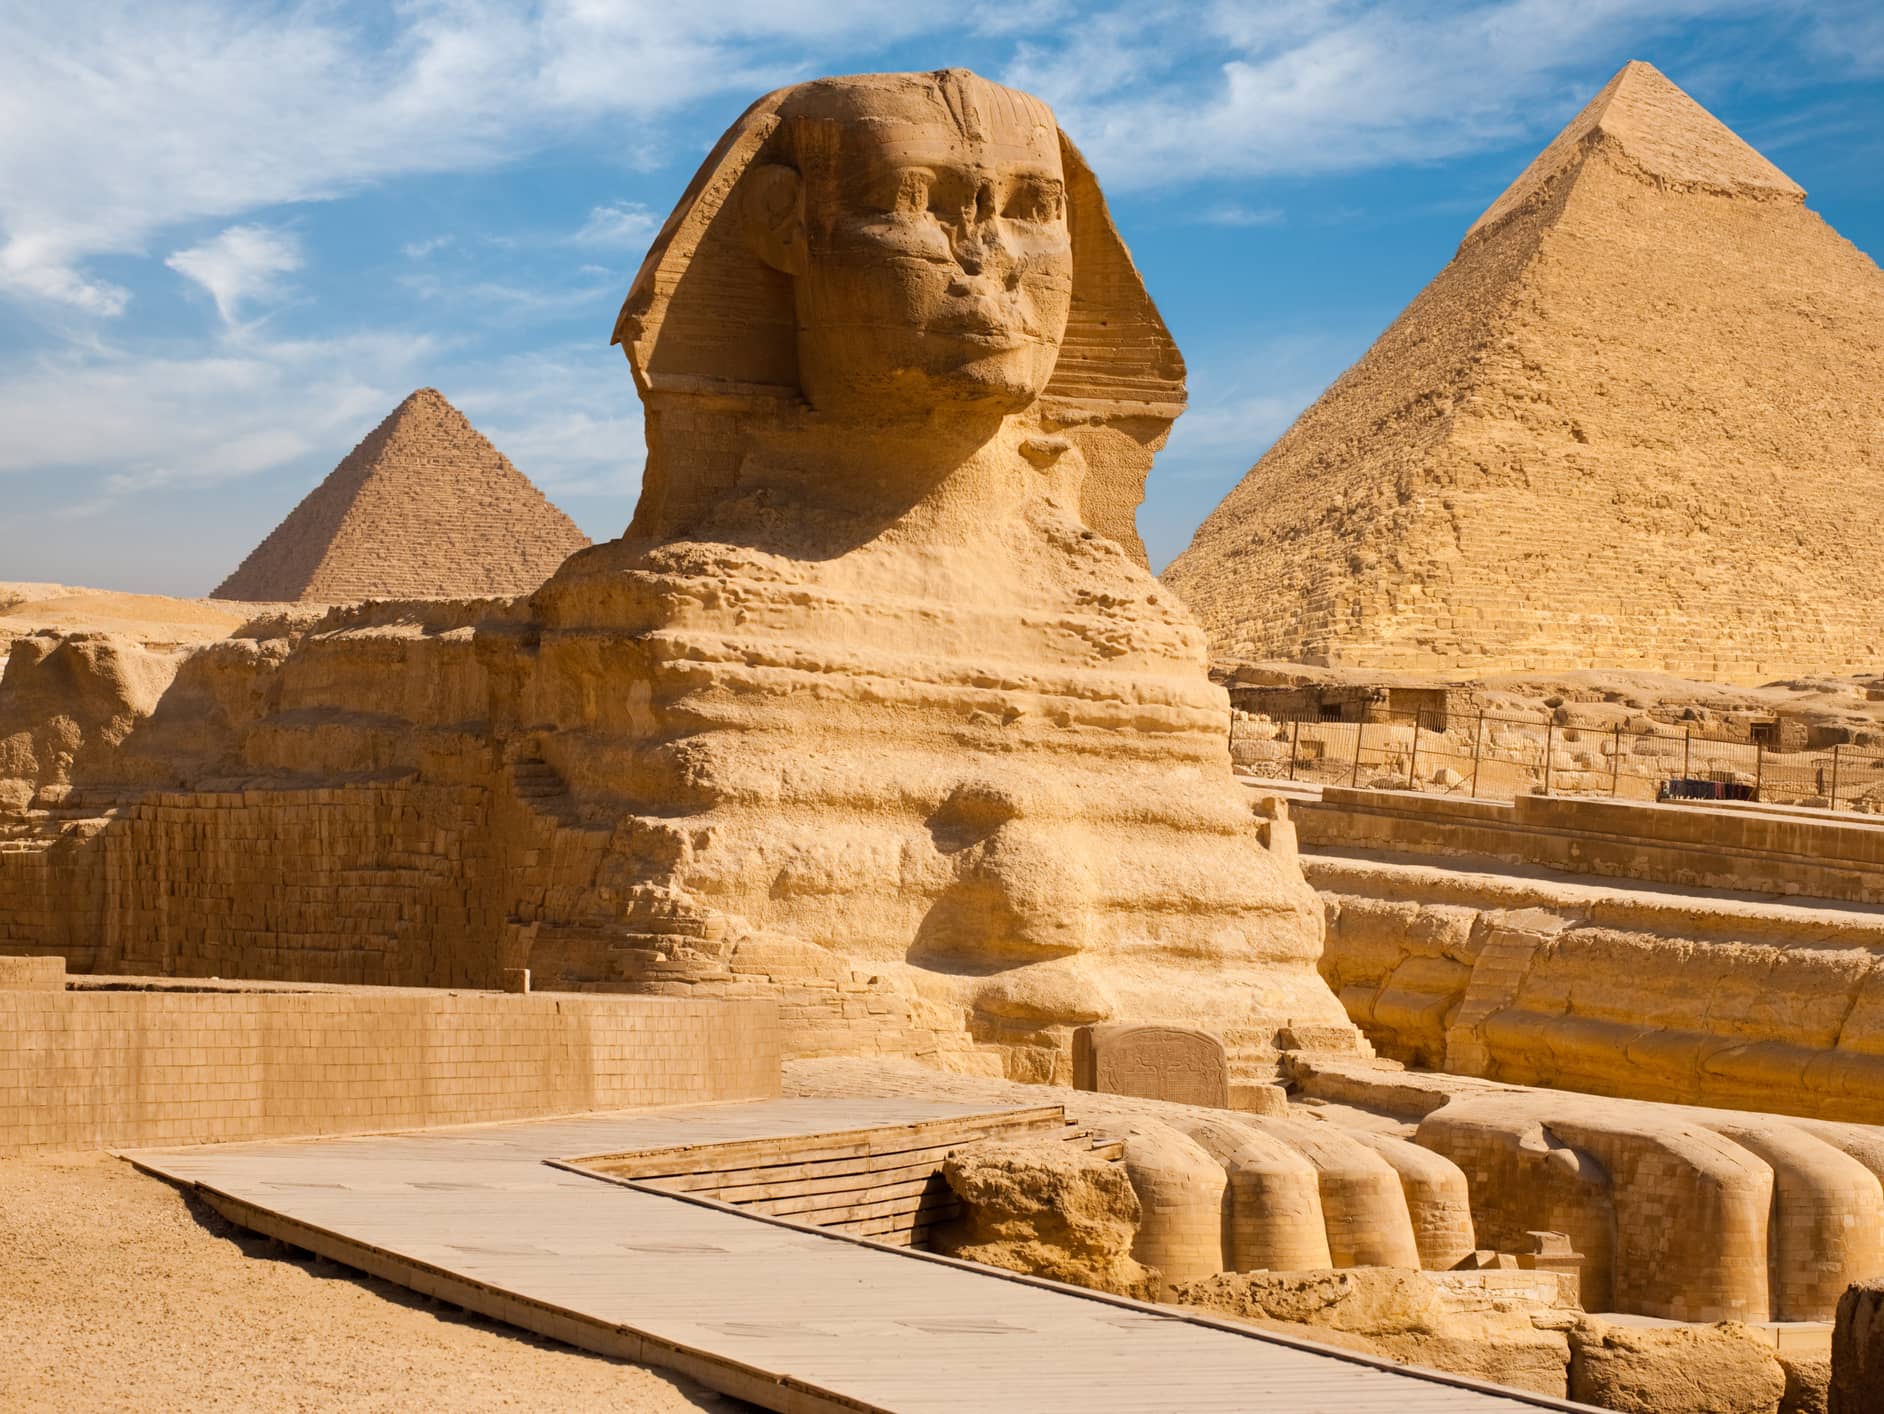  GAZE UP AT THE ENIGMATIC SPHINX  